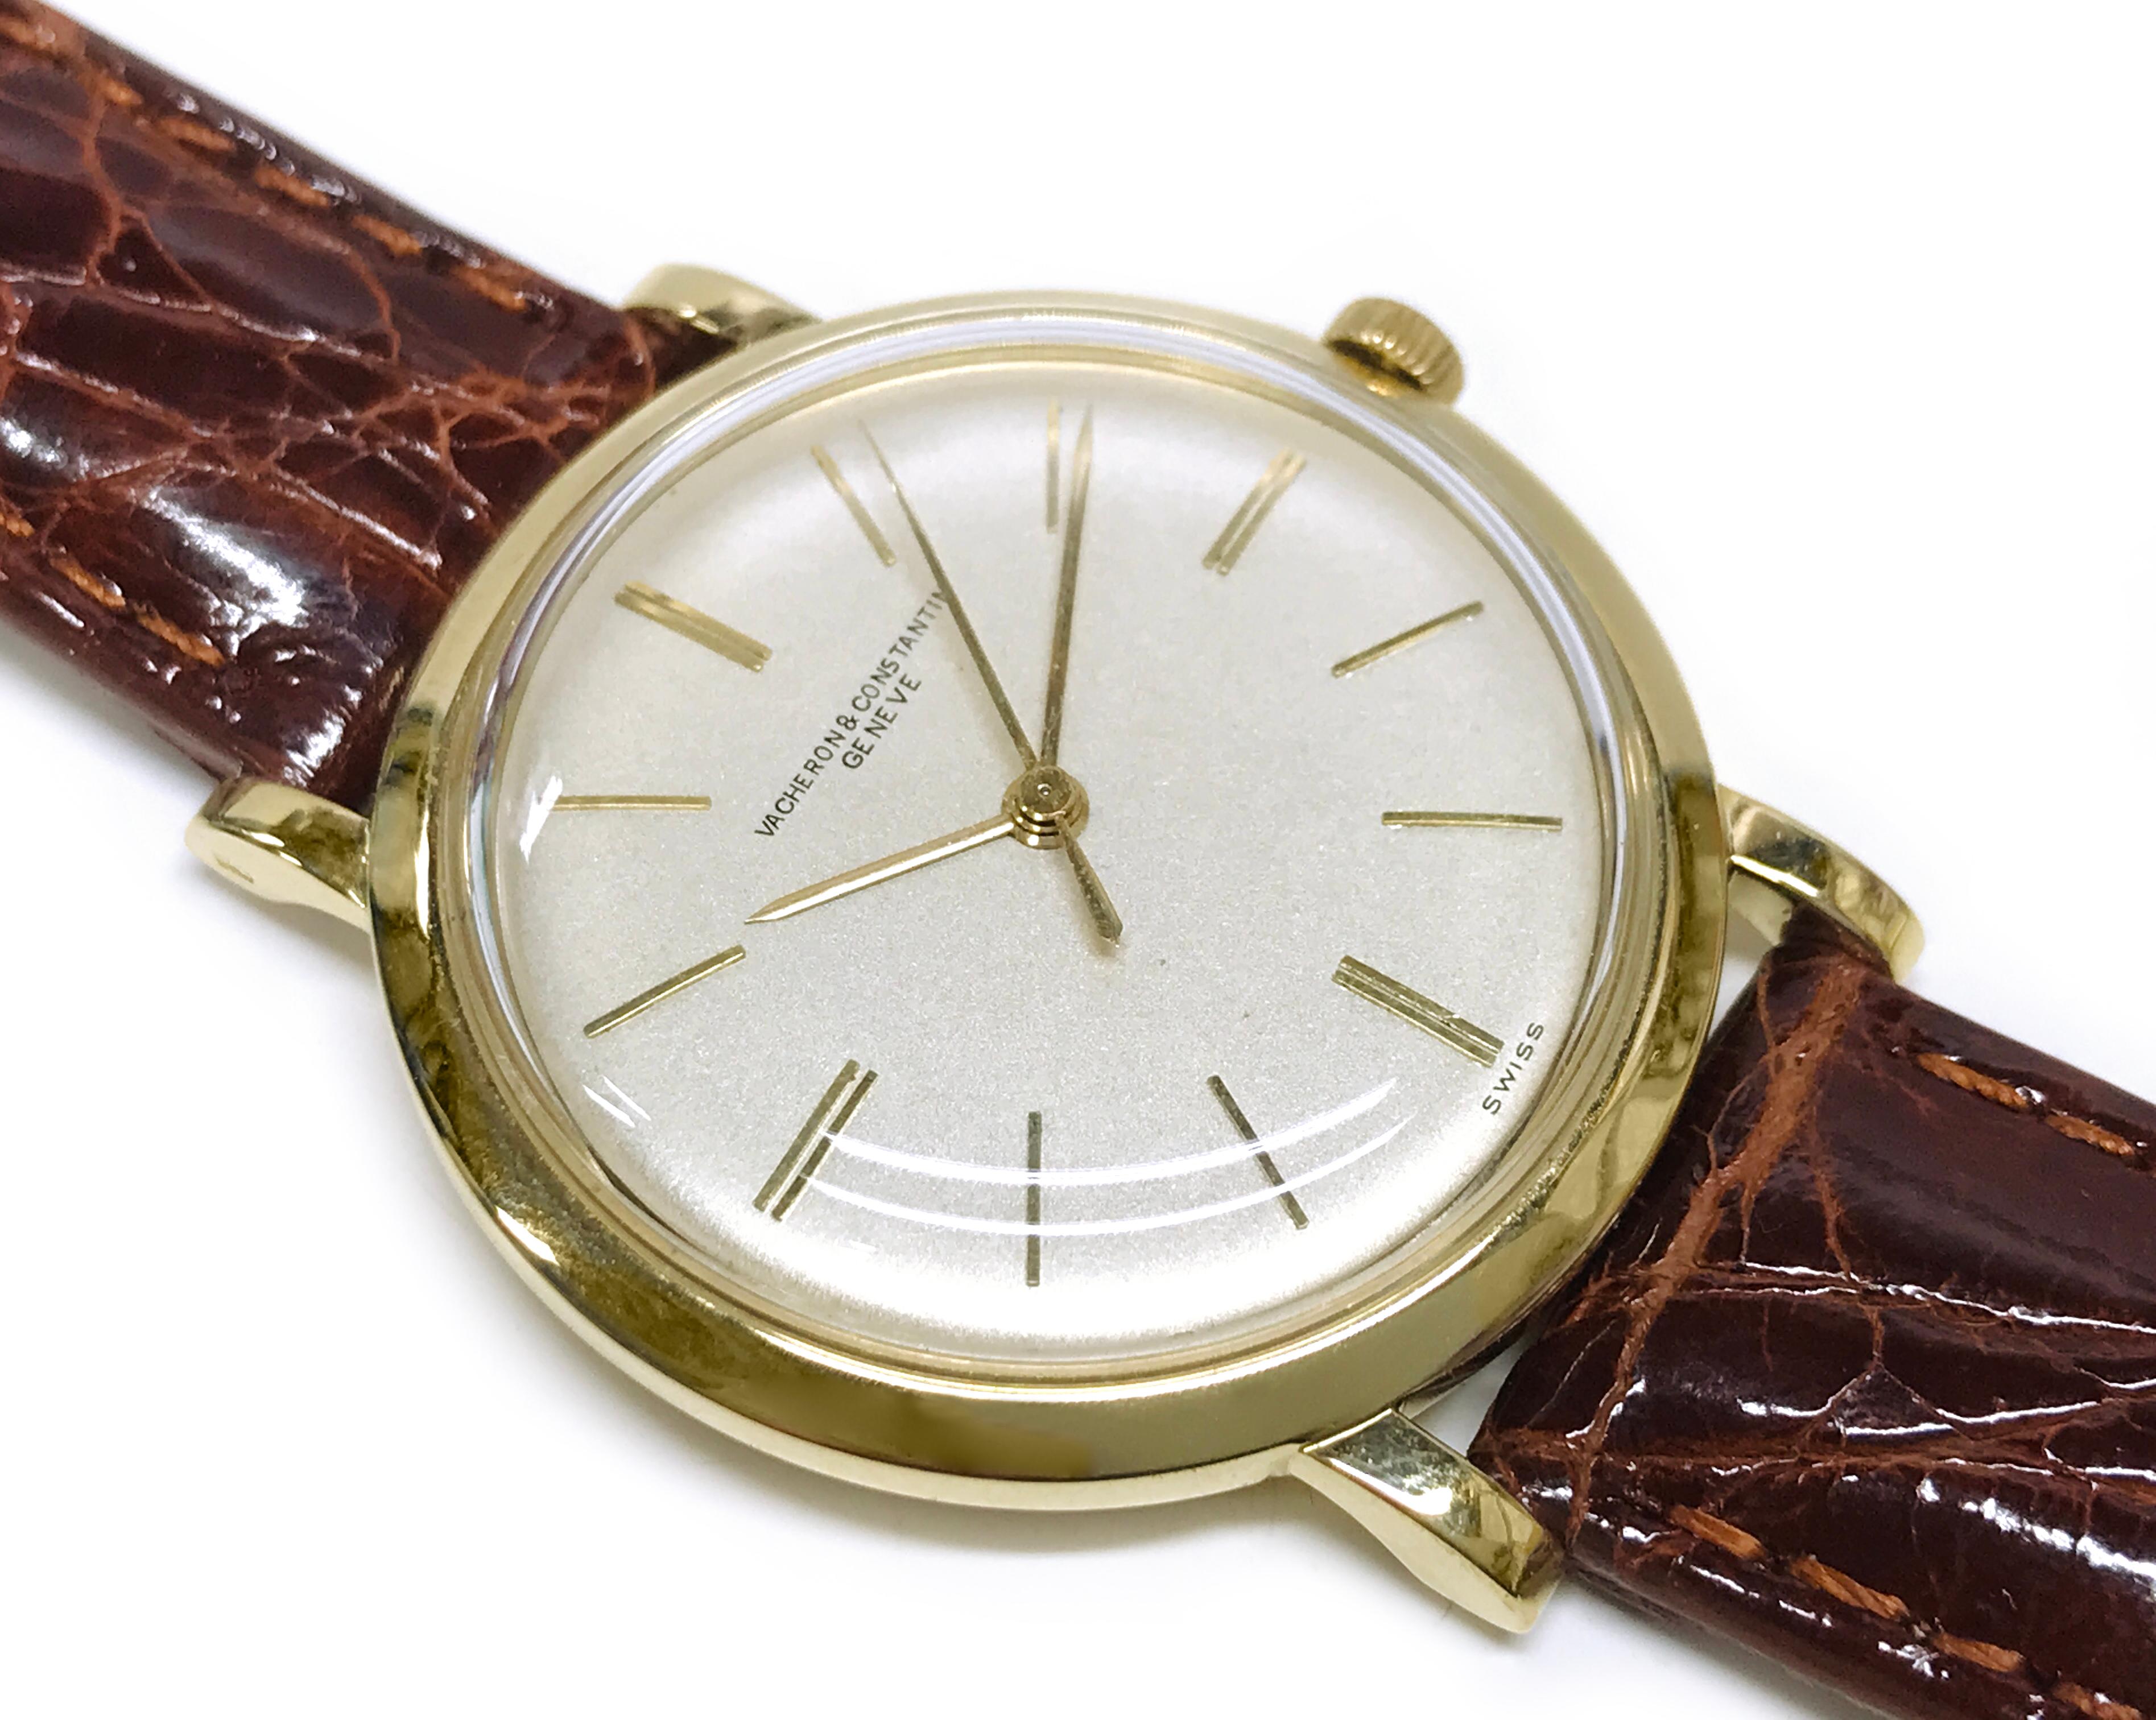 Vacheron & Constantin, 18 Karat Men's Manual Watch, 1957. The watch has a 5 Jewel Movement #VC 1002. The case number is 355838, serial #530703. The watch has a silver dial, gold hour and minute hands, and manual wind movement. On the back of the